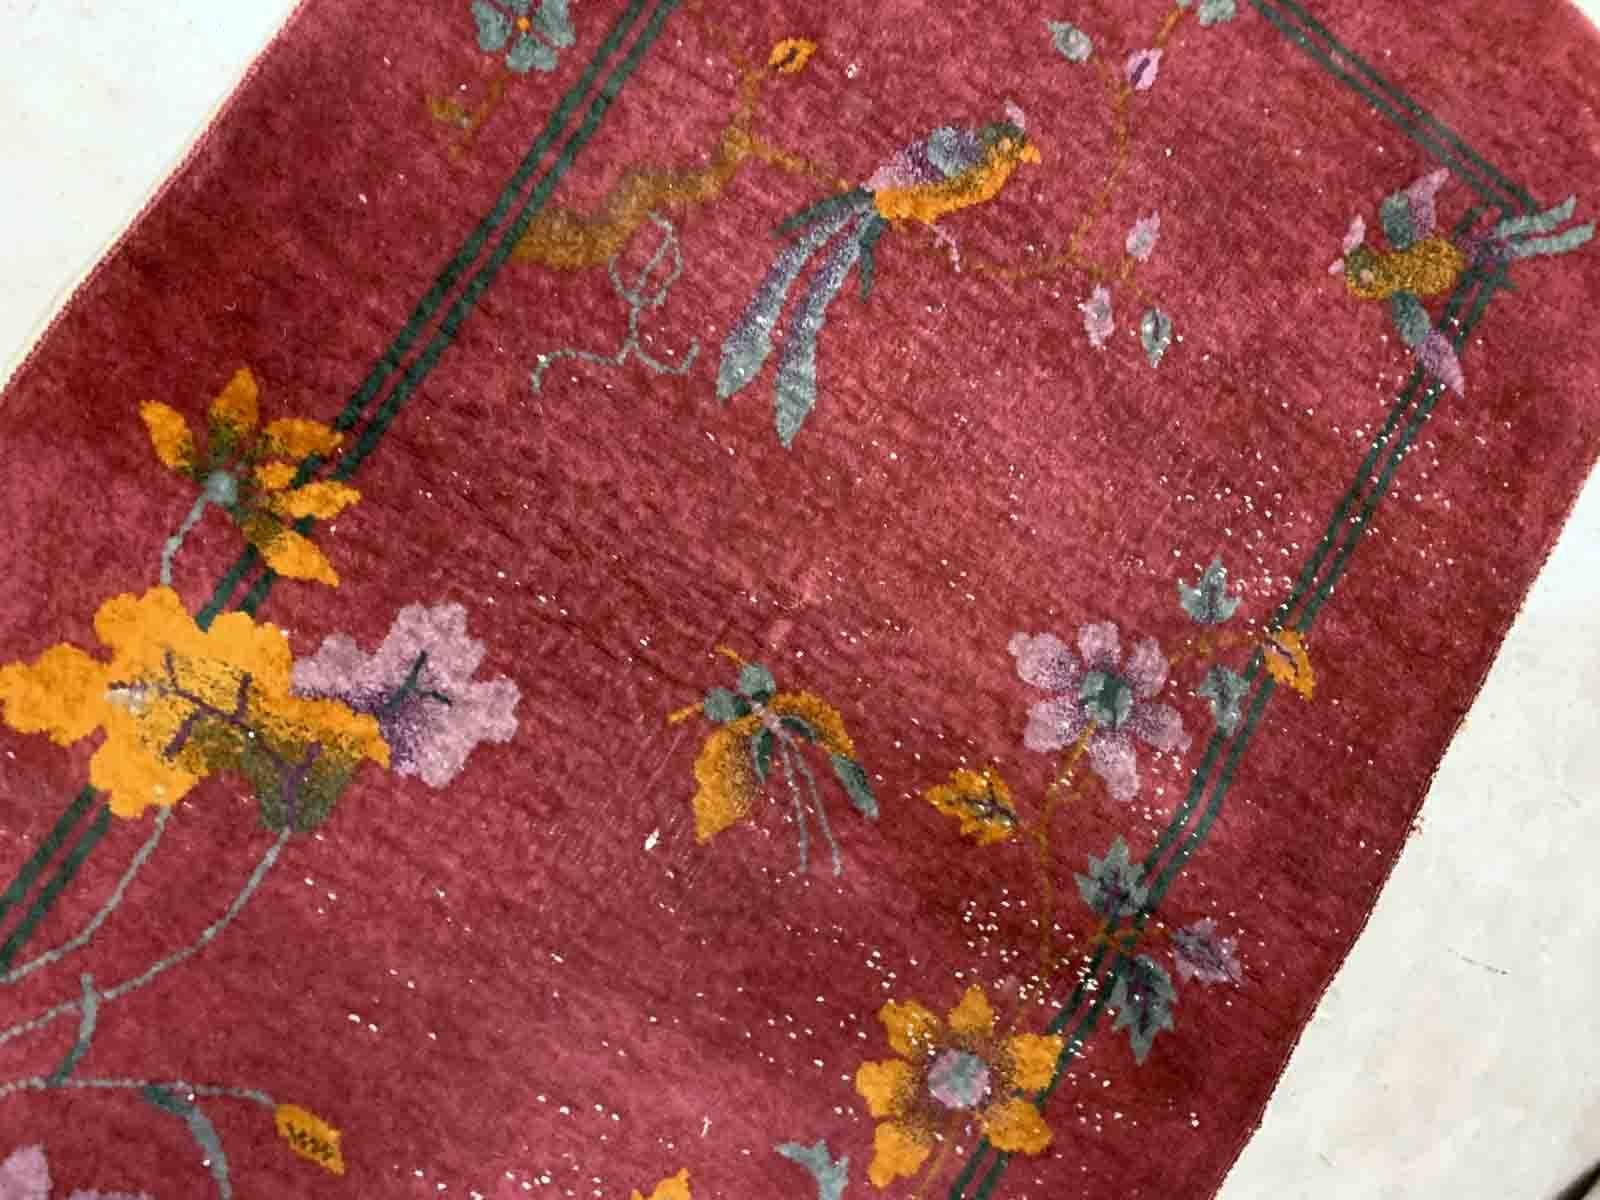 Handmade antique Art Deco Chinese rug in red color. The rug has traditional floral Art Deco design with some birds and vases. It is from the beginning of 20th century in original condition, it has some low pile.

-condition: original, some low